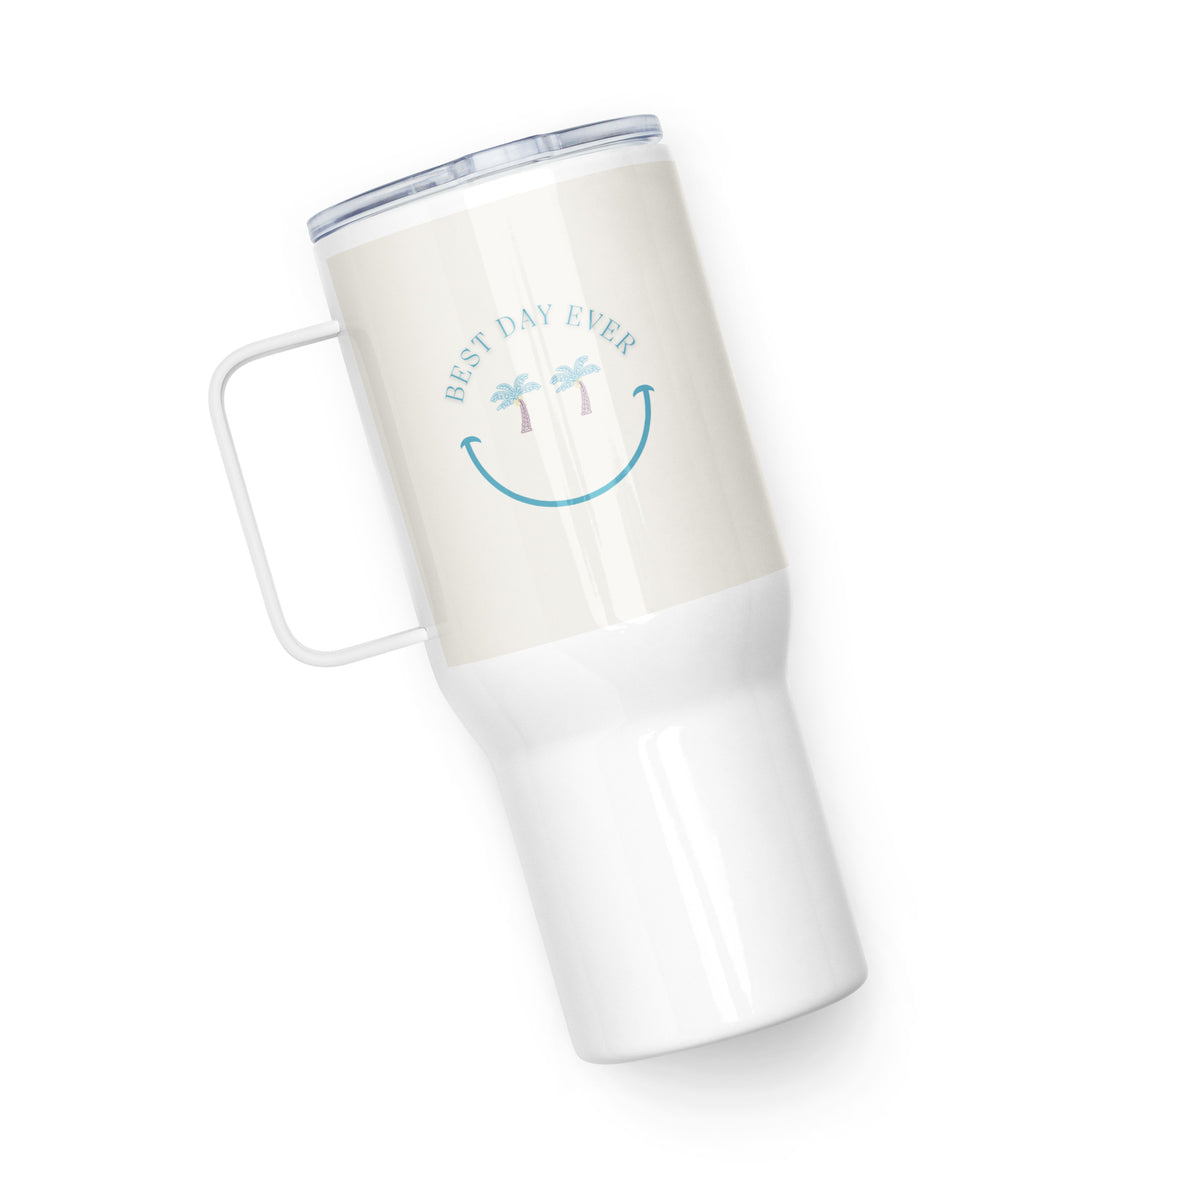 Best Day Ever Travel mug with a handle